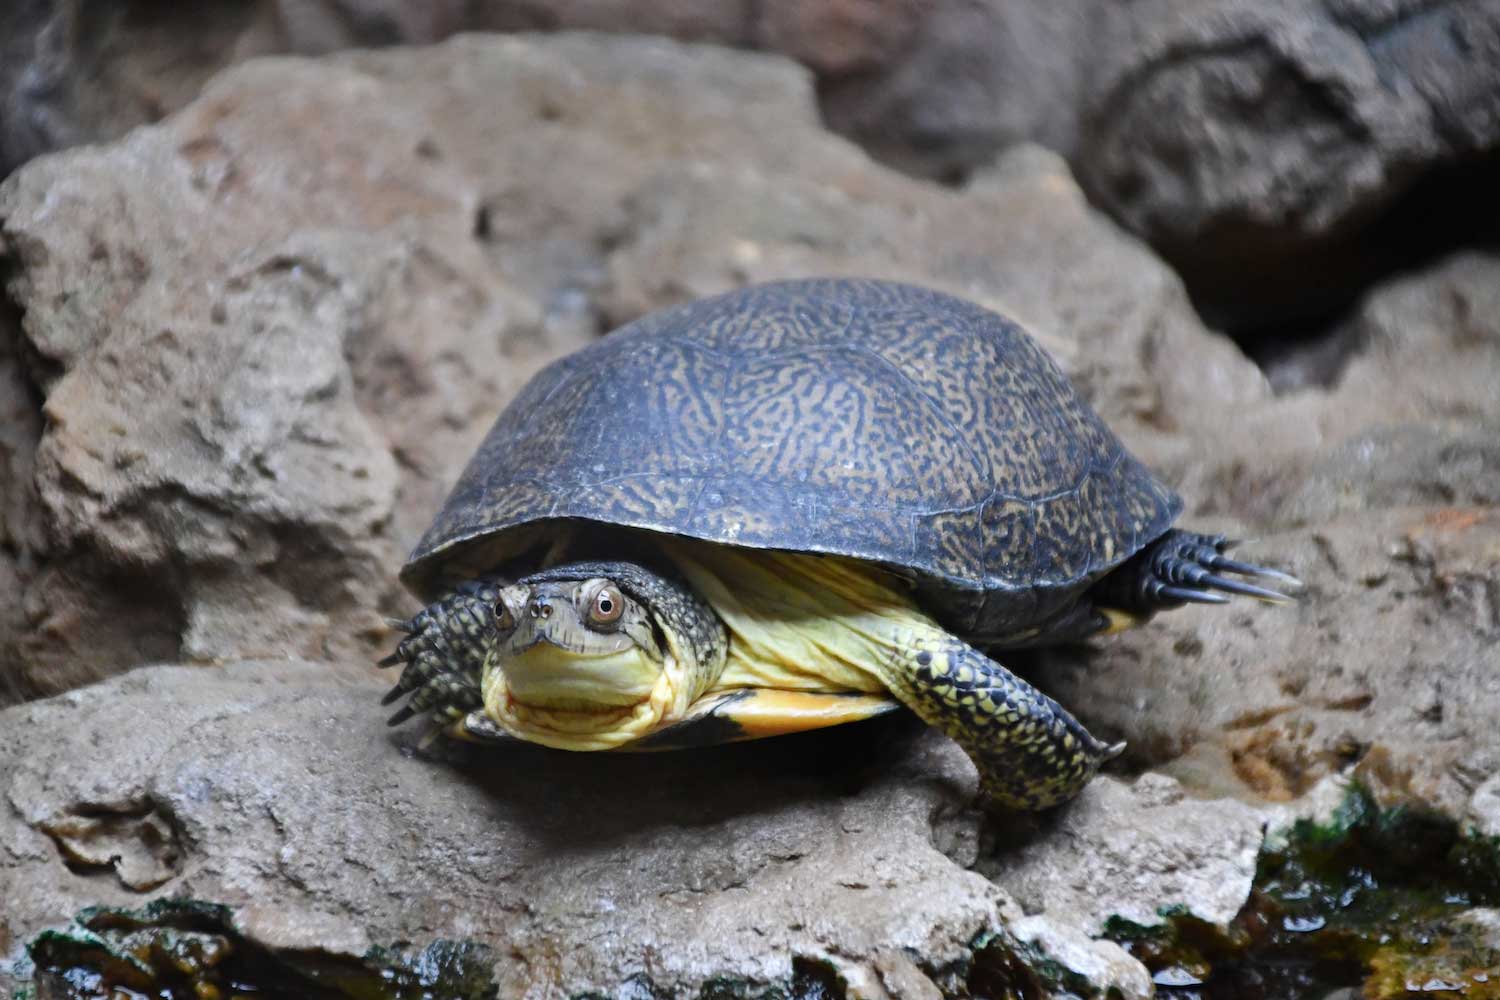 A Blanding's turtle on a rock formation in its enclosure